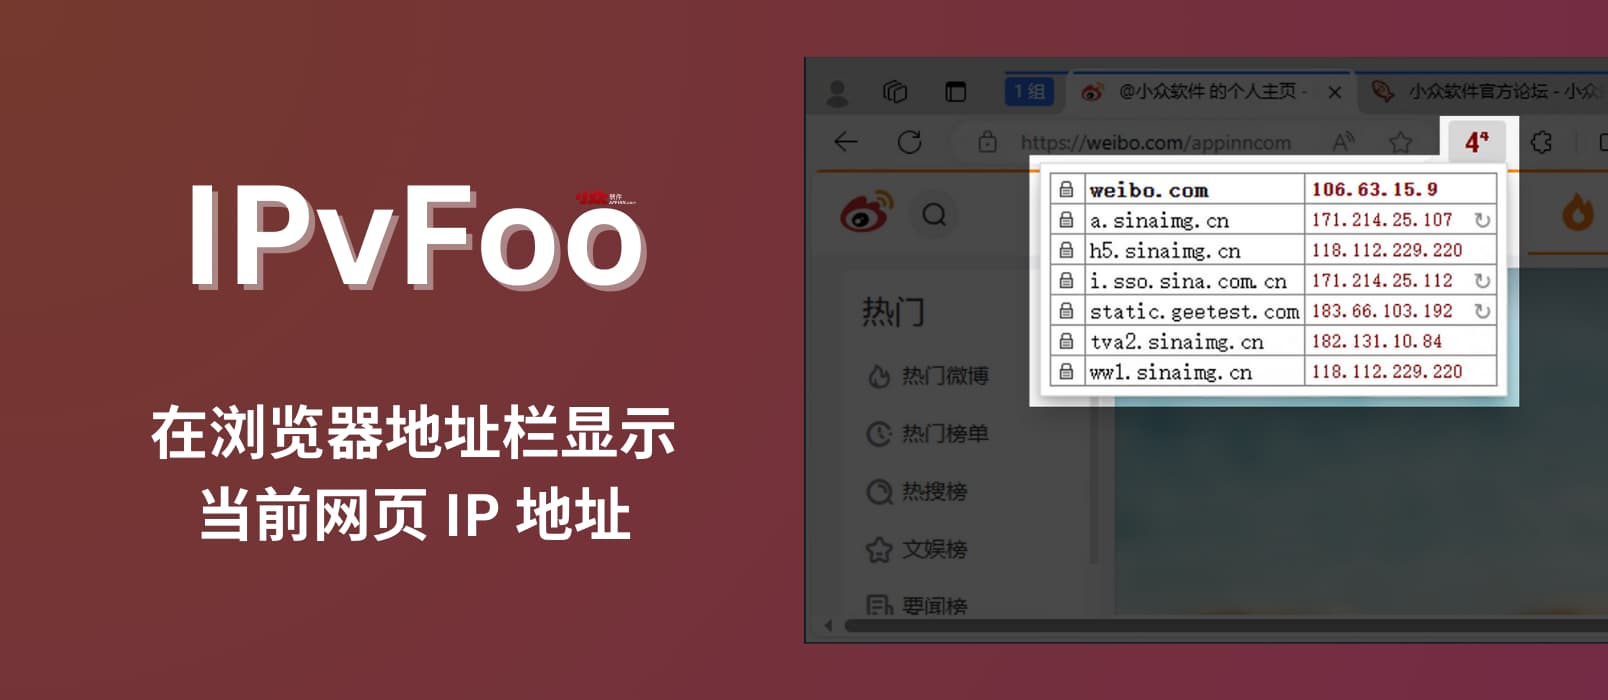  IPvFoo - Display the current web page IP address in the browser address bar [Chrome/Firefox]